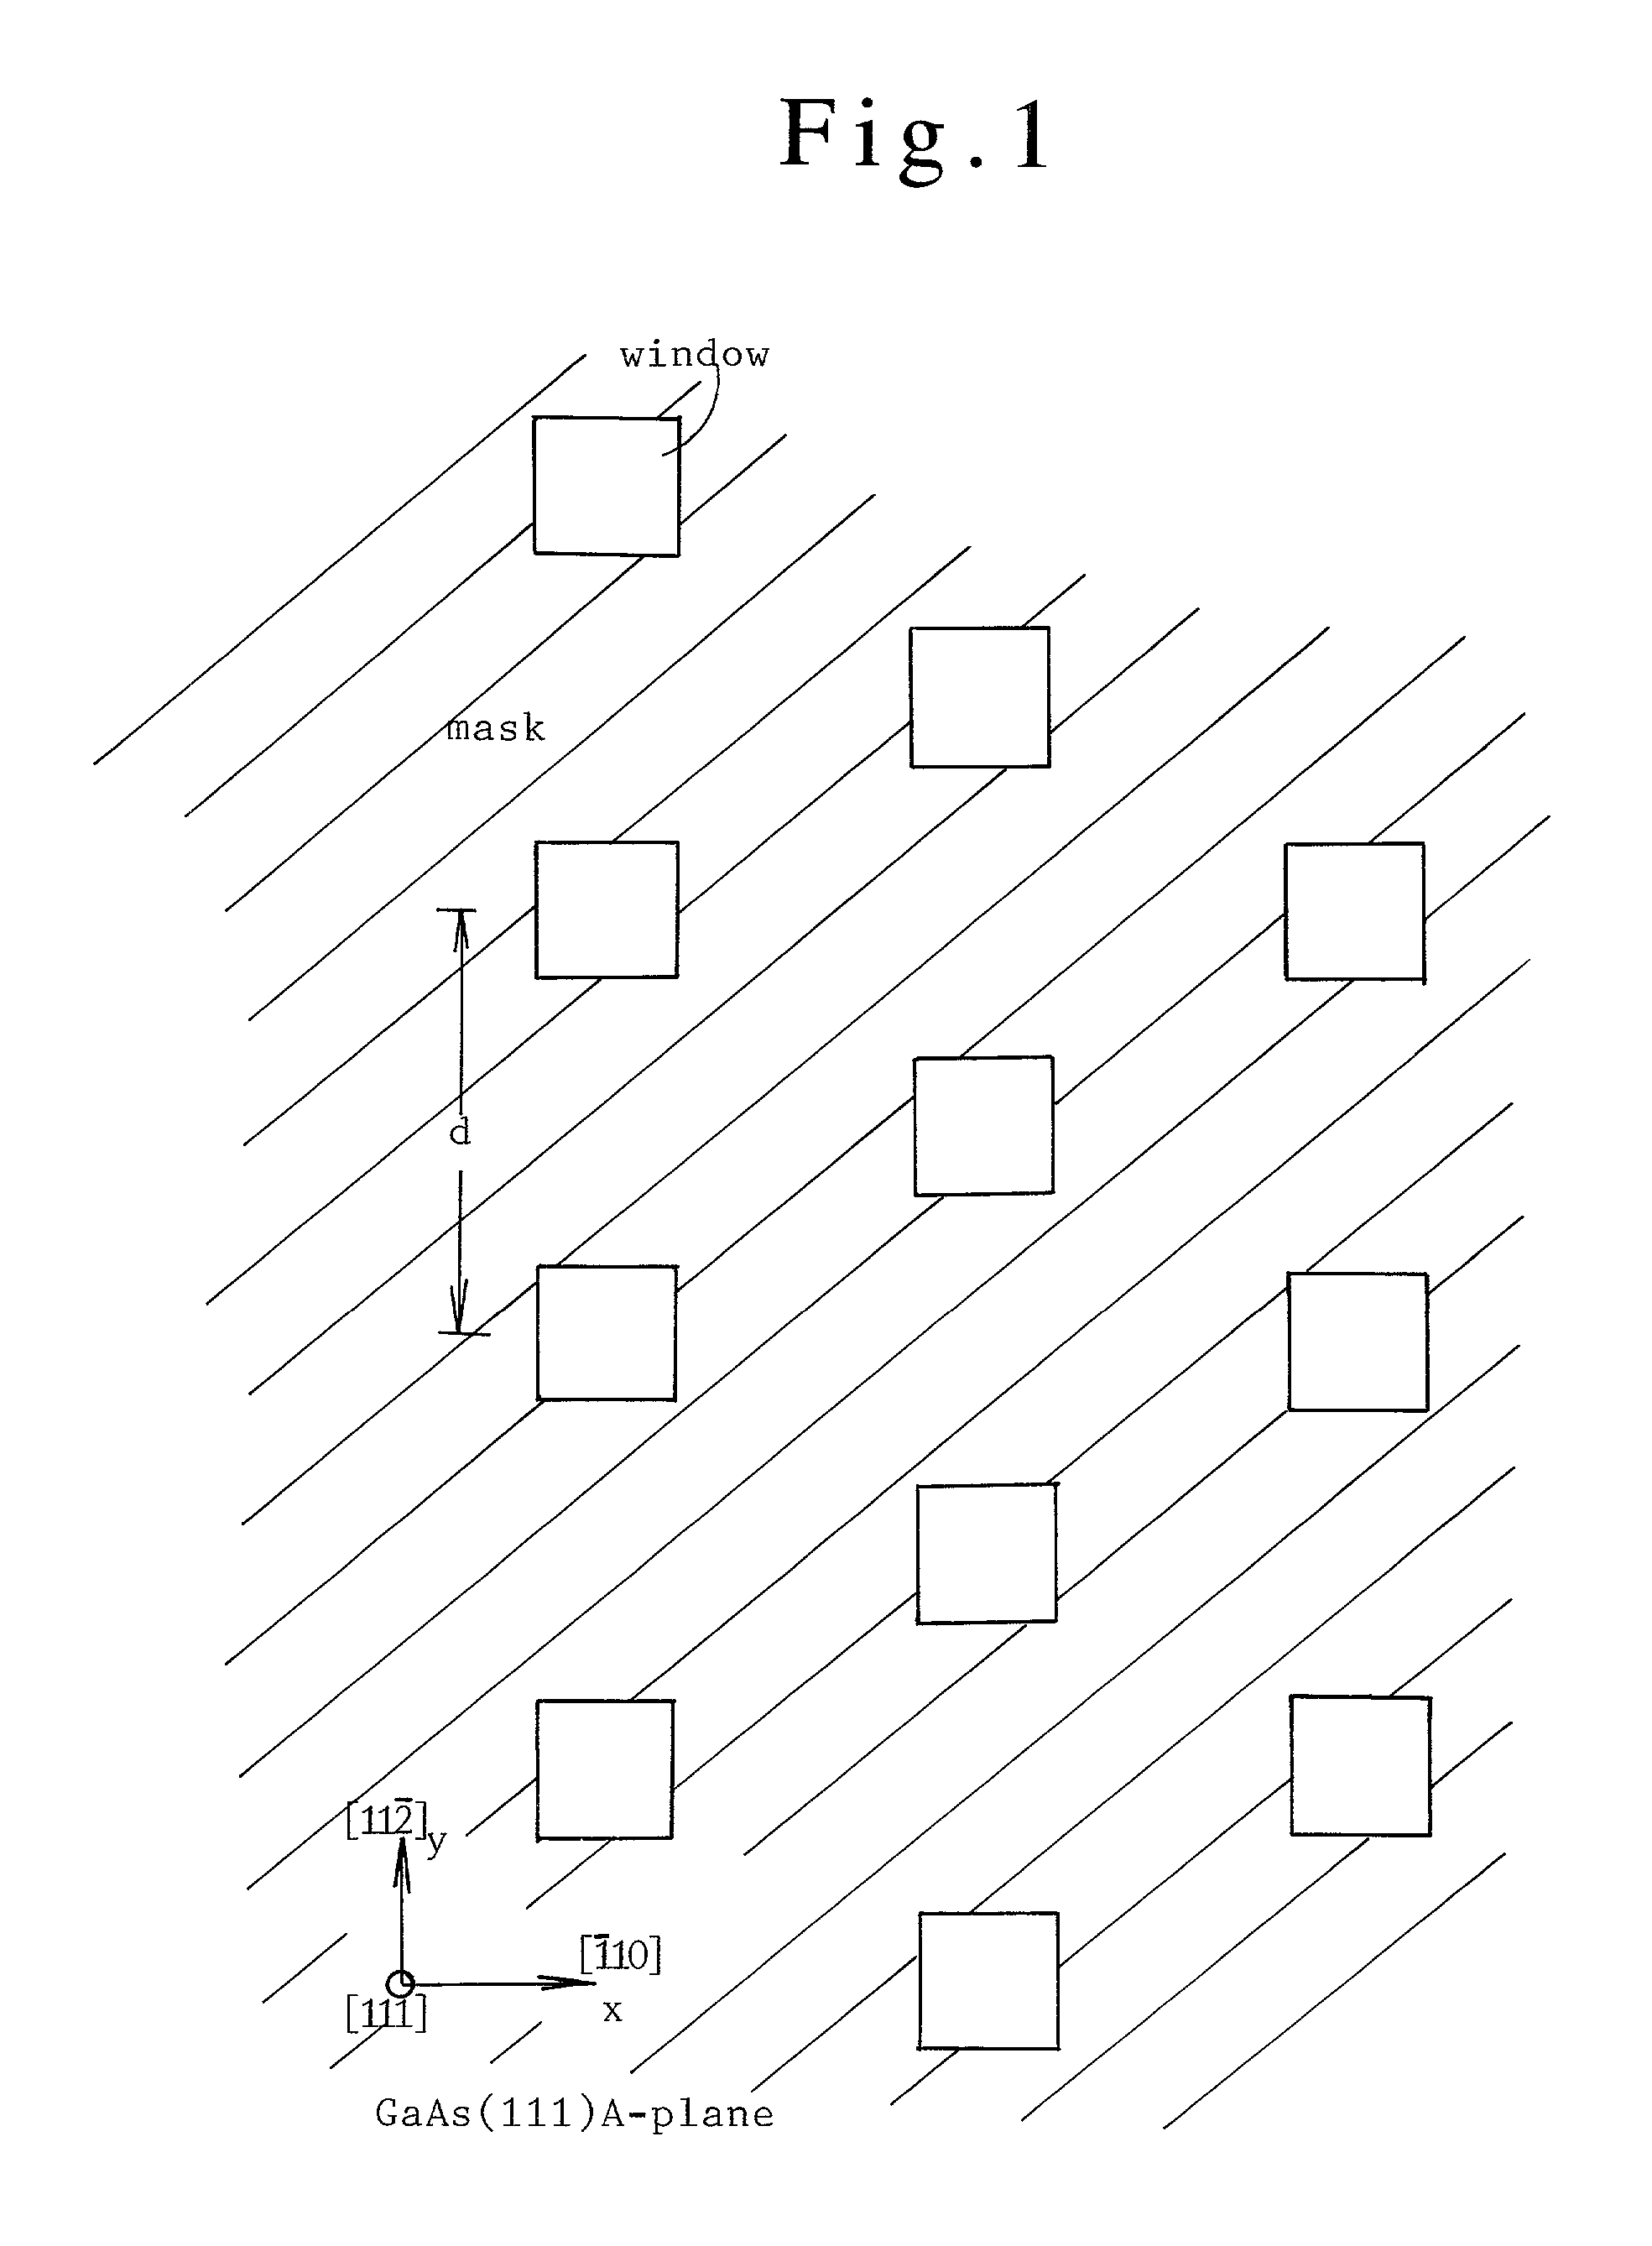 Gallium nitride single crystal substrate and method of proucing same